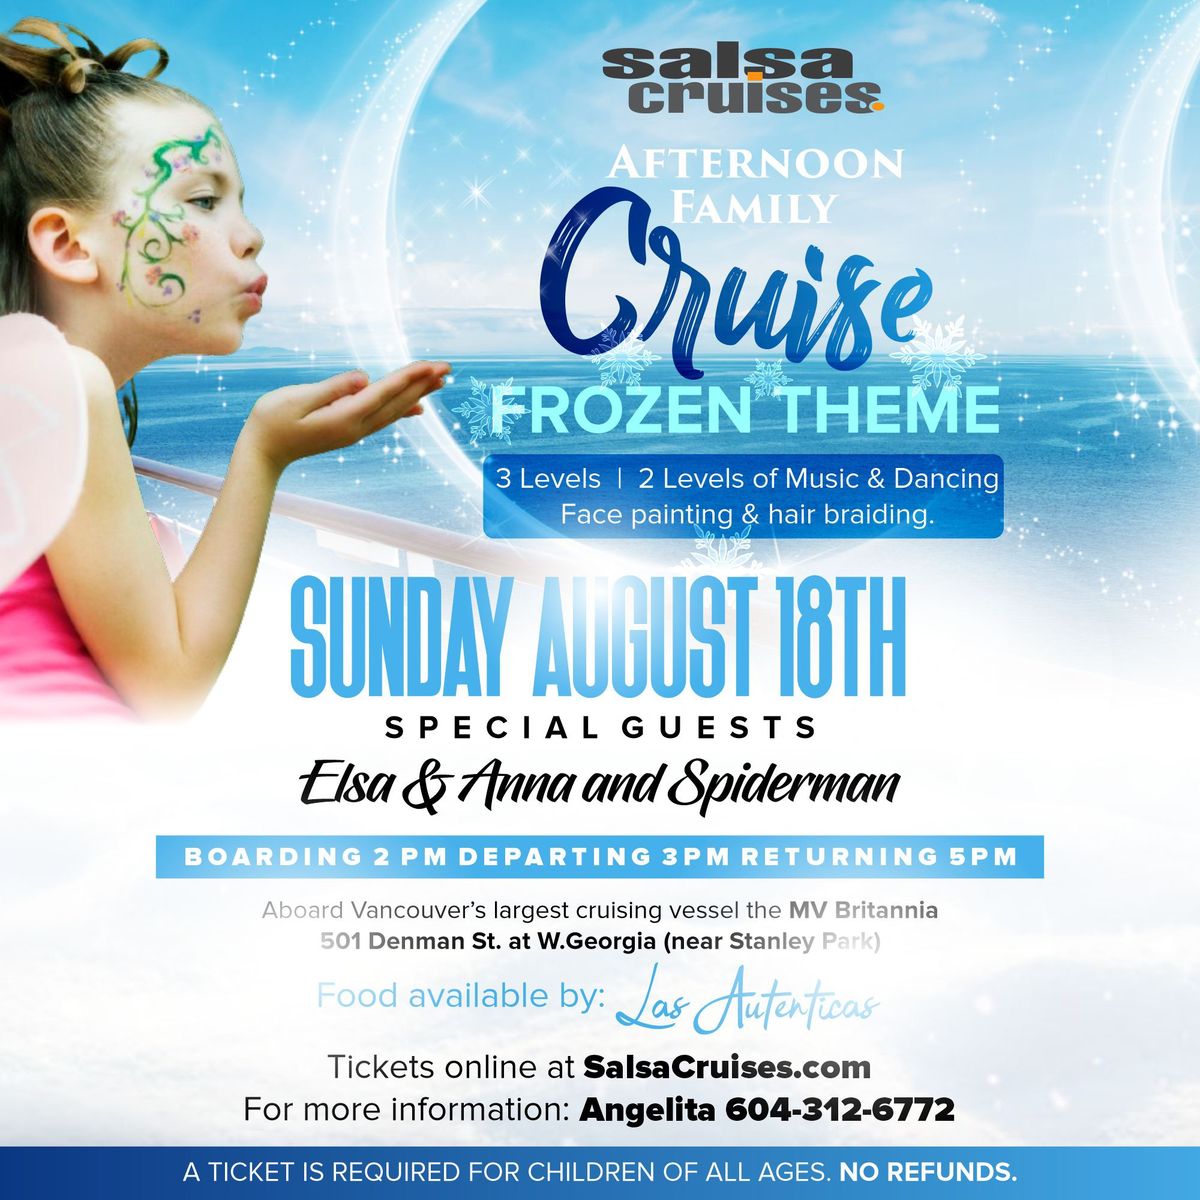 Afternoon Family Cruise \u2744\ufe0f Frozen theme - Sunday, August 18th